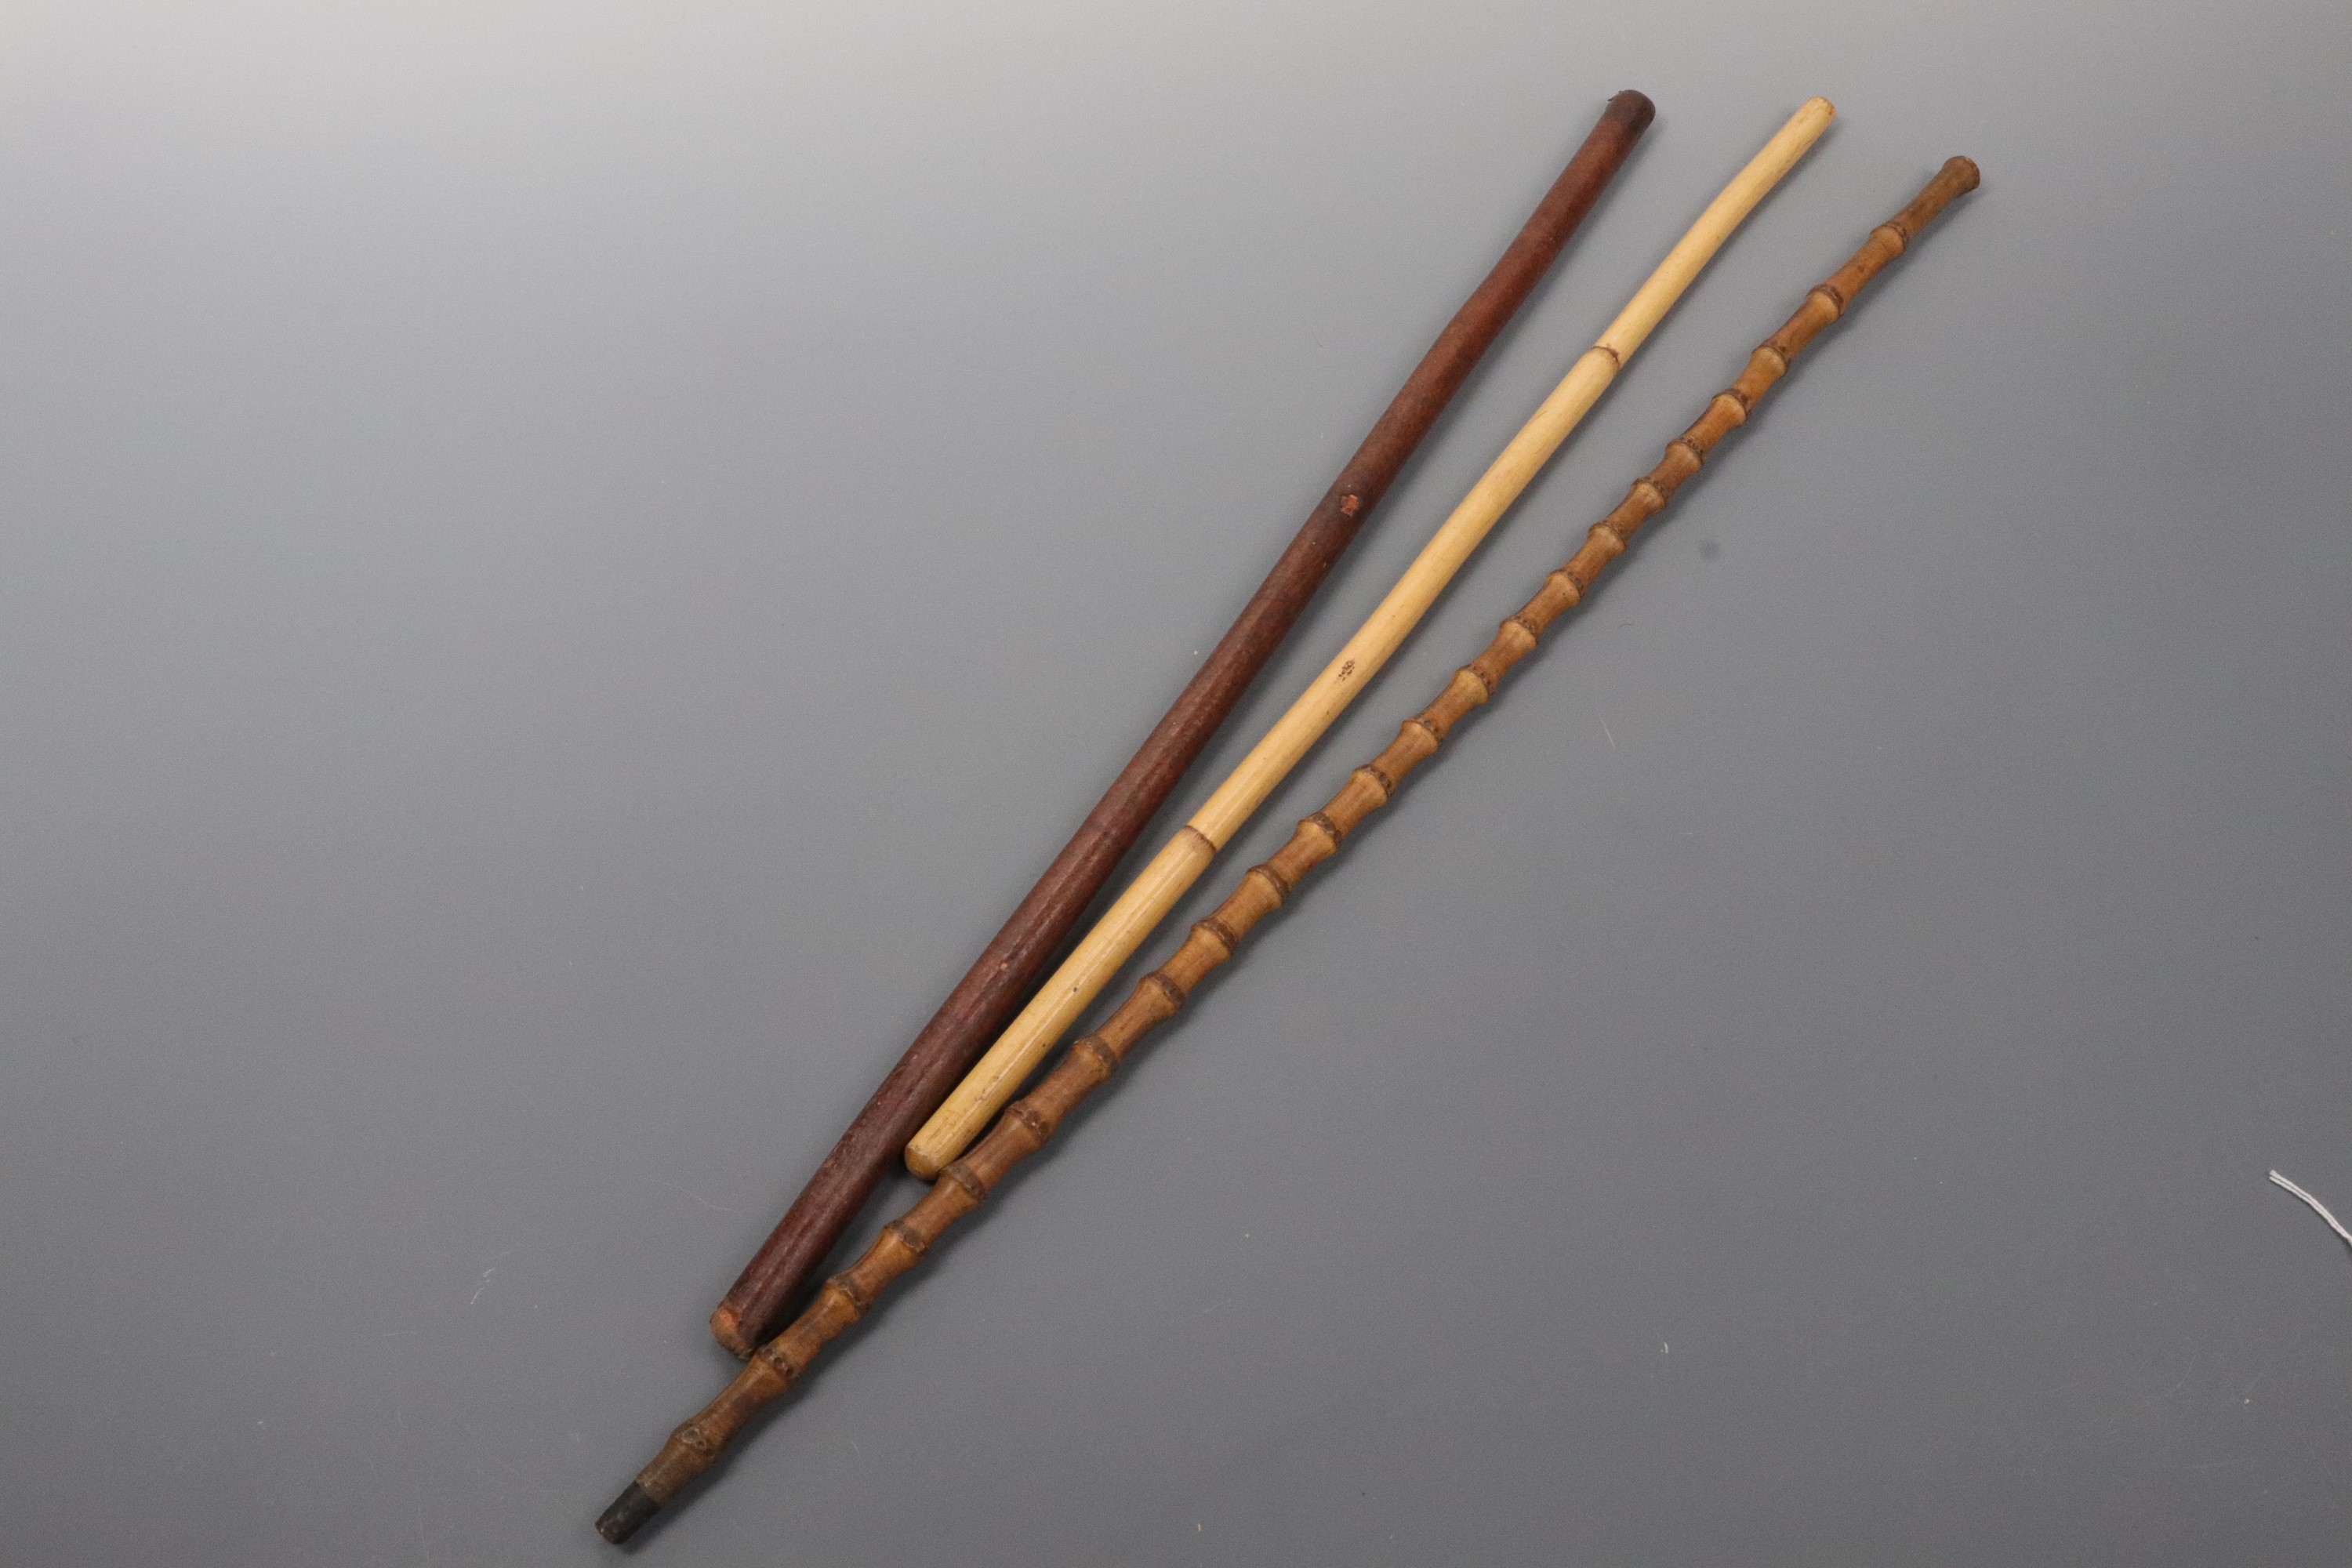 A hide-covered and two bamboo swagger sticks